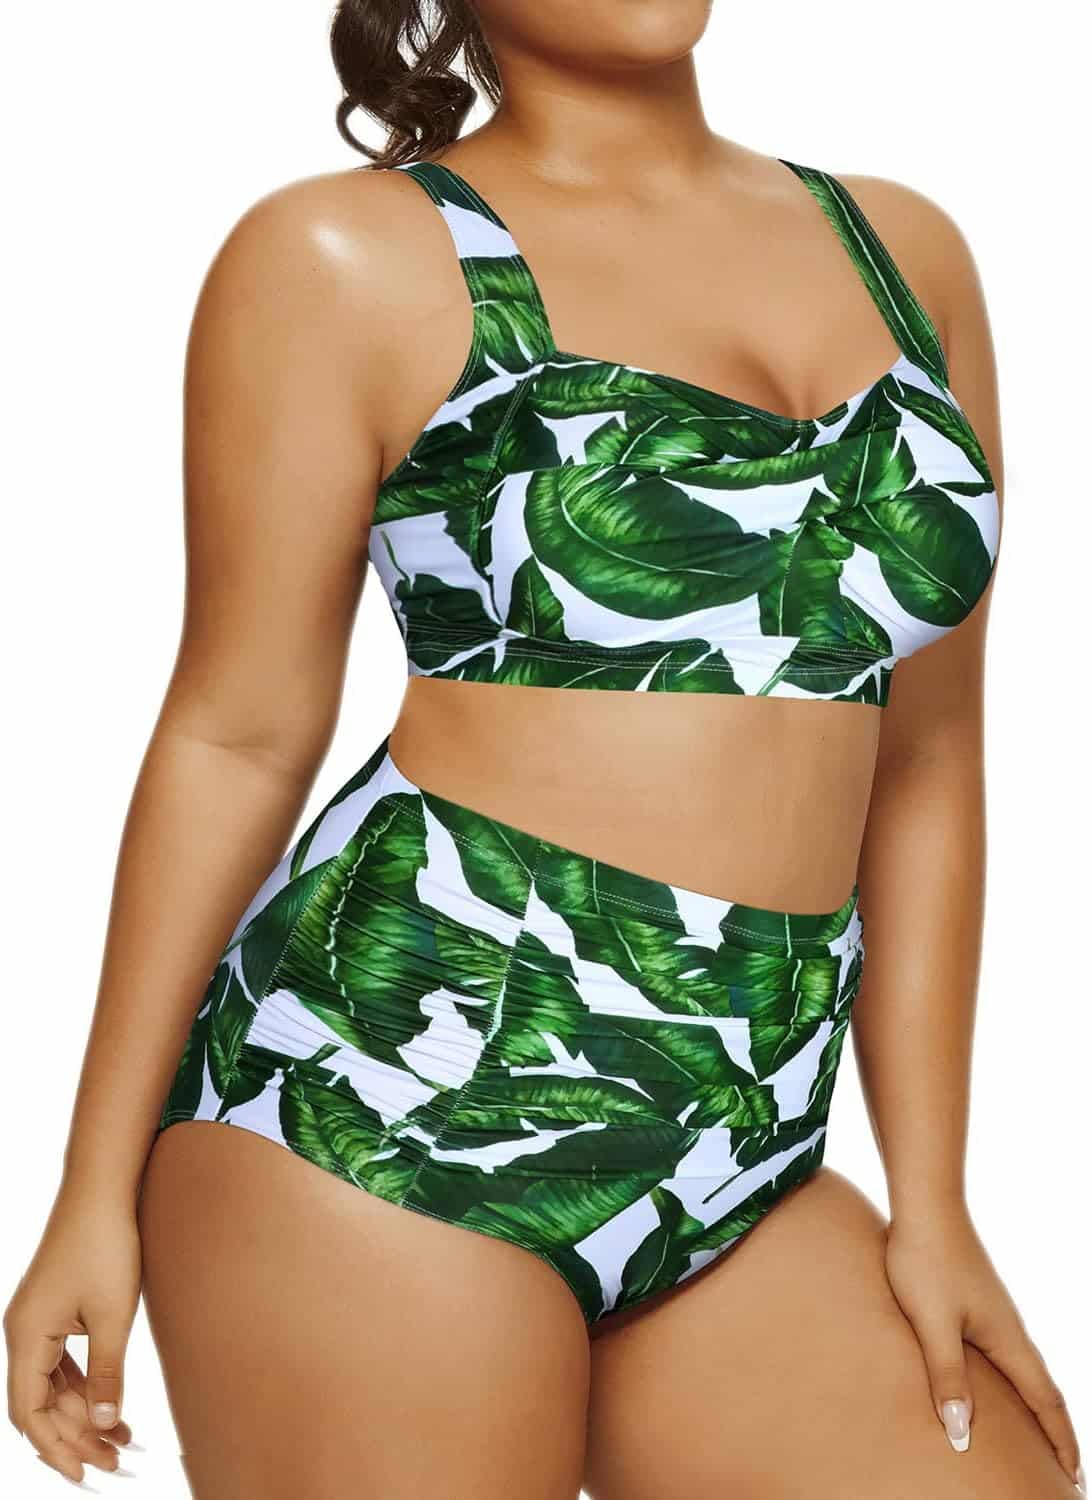 Embrace Your Curves with Daci Women's Two Piece High Waisted Plus Size Swimsuits: A Comprehensive Review